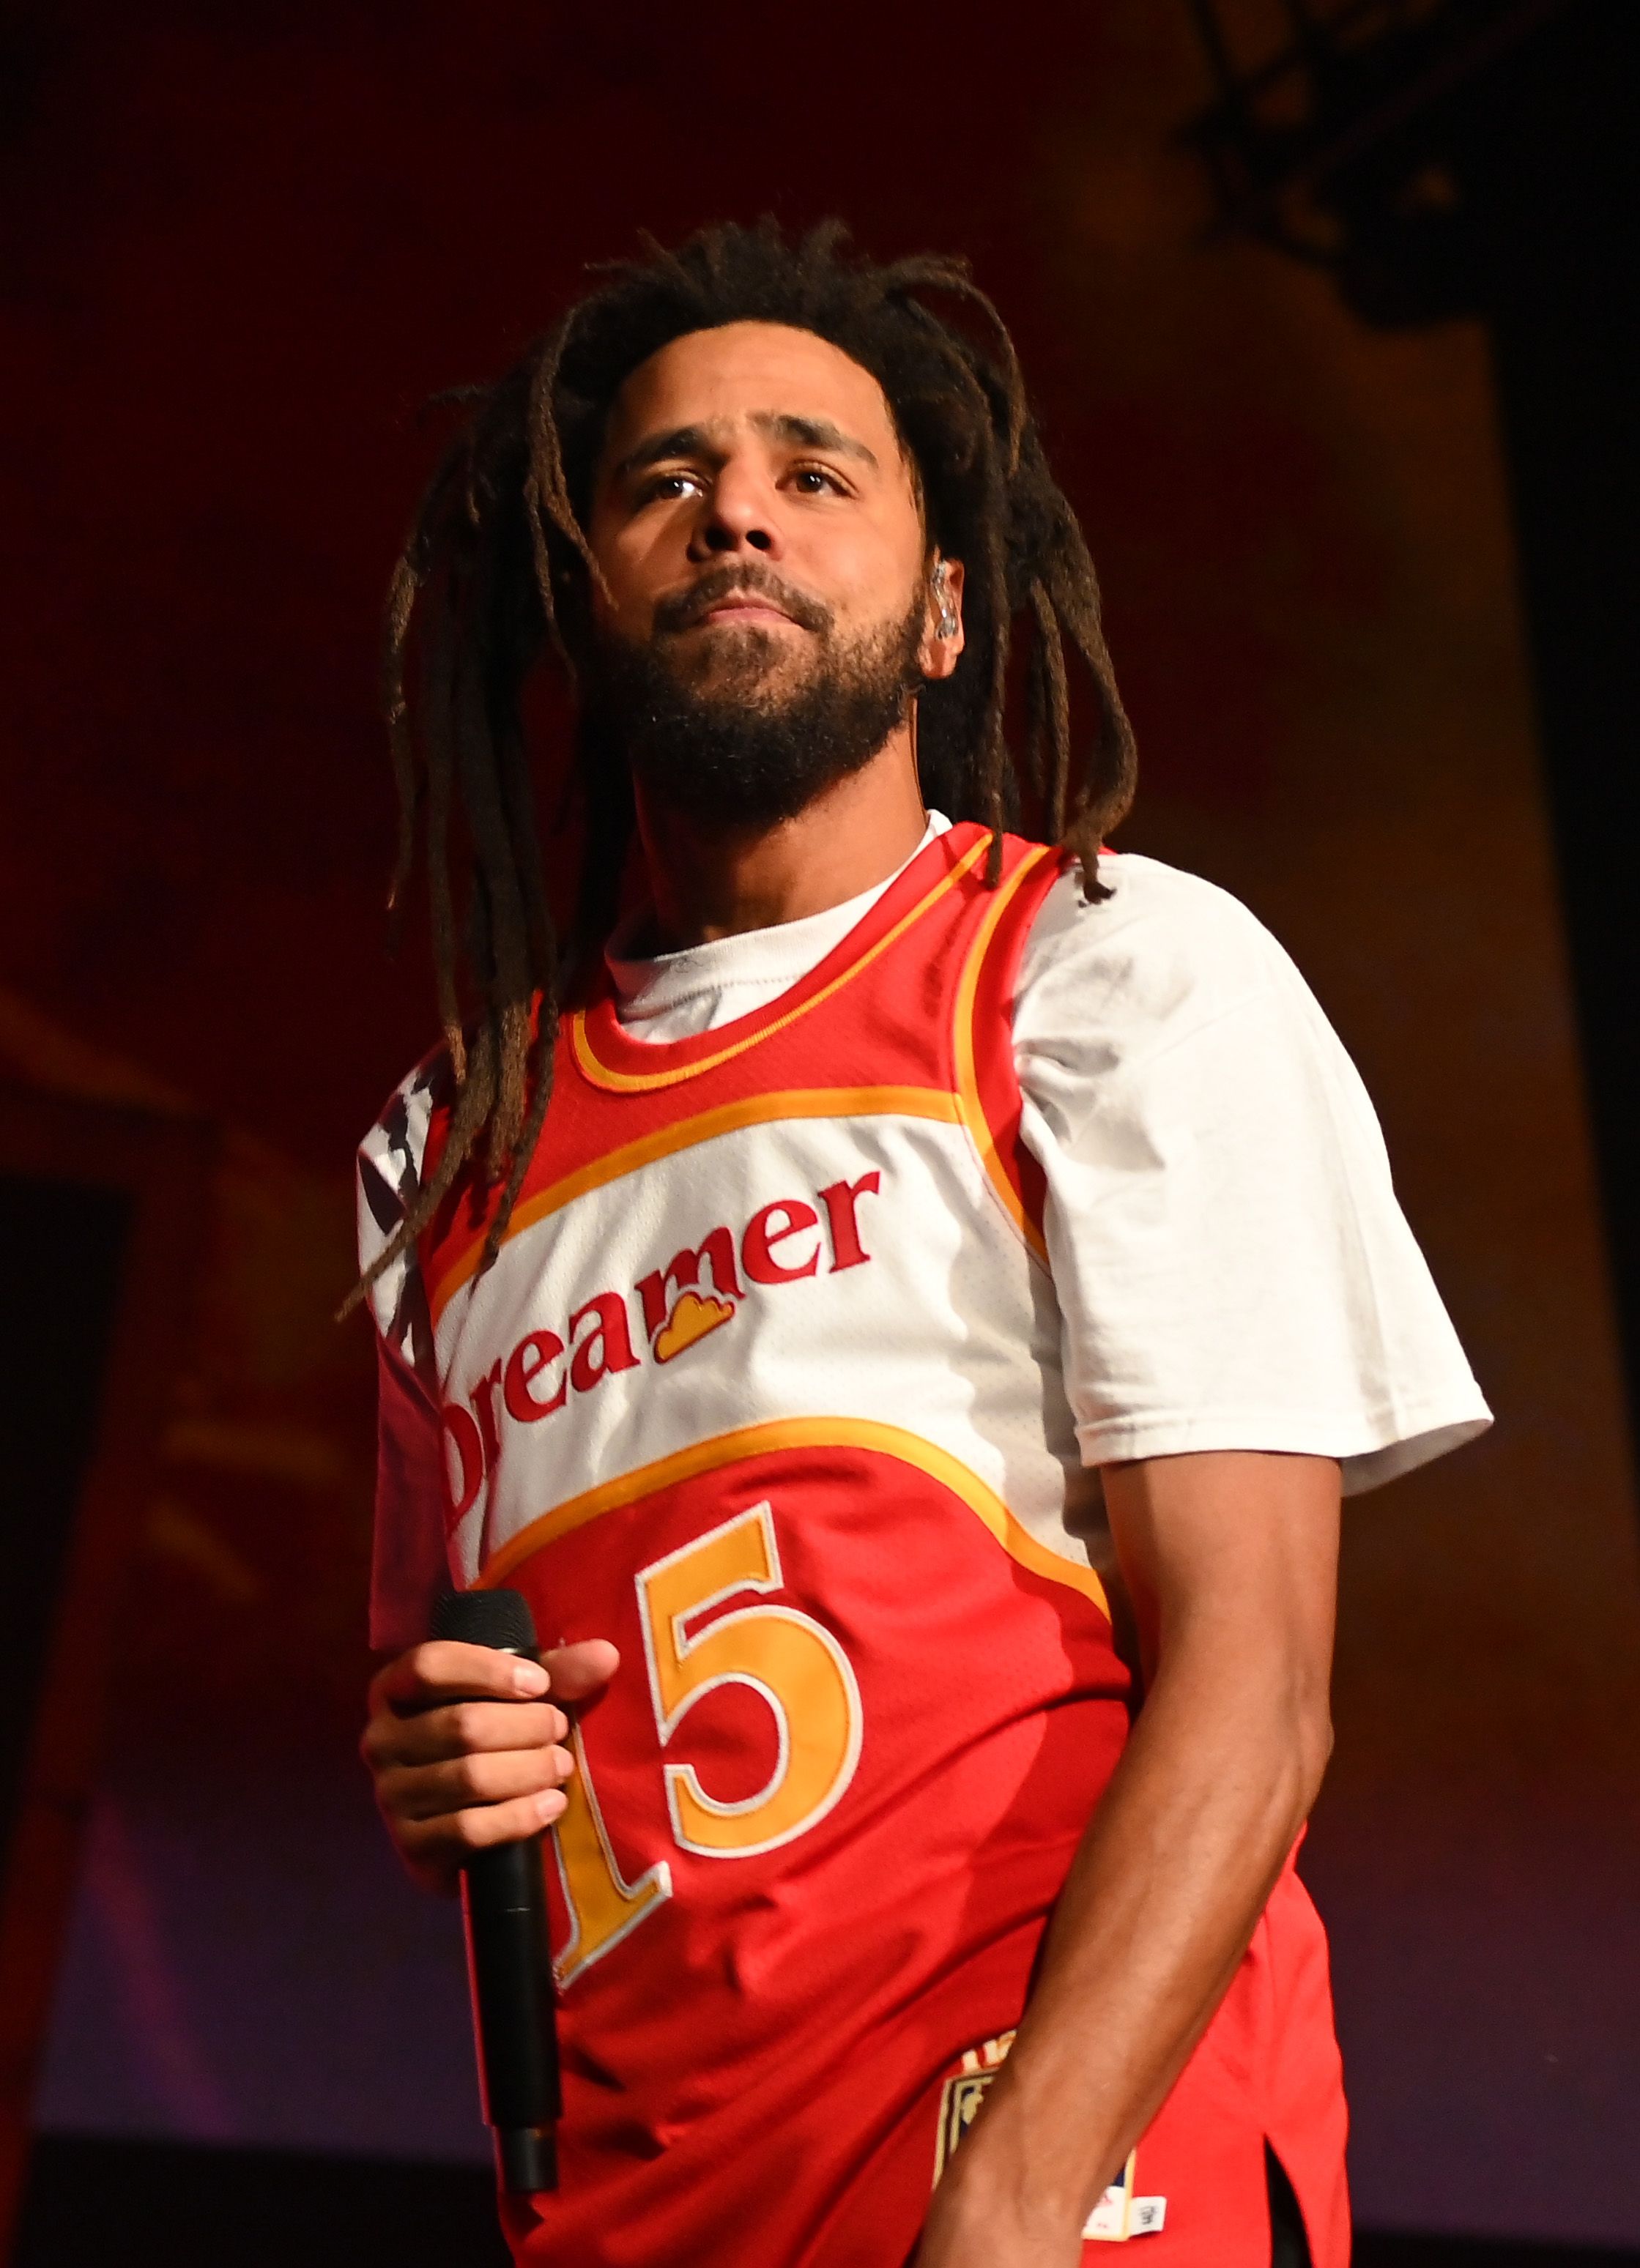 J. Cole performs during his "The Off-Season" tour at State Farm Arena on September 27, 2021, in Atlanta, Georgia. | Source: Getty Images